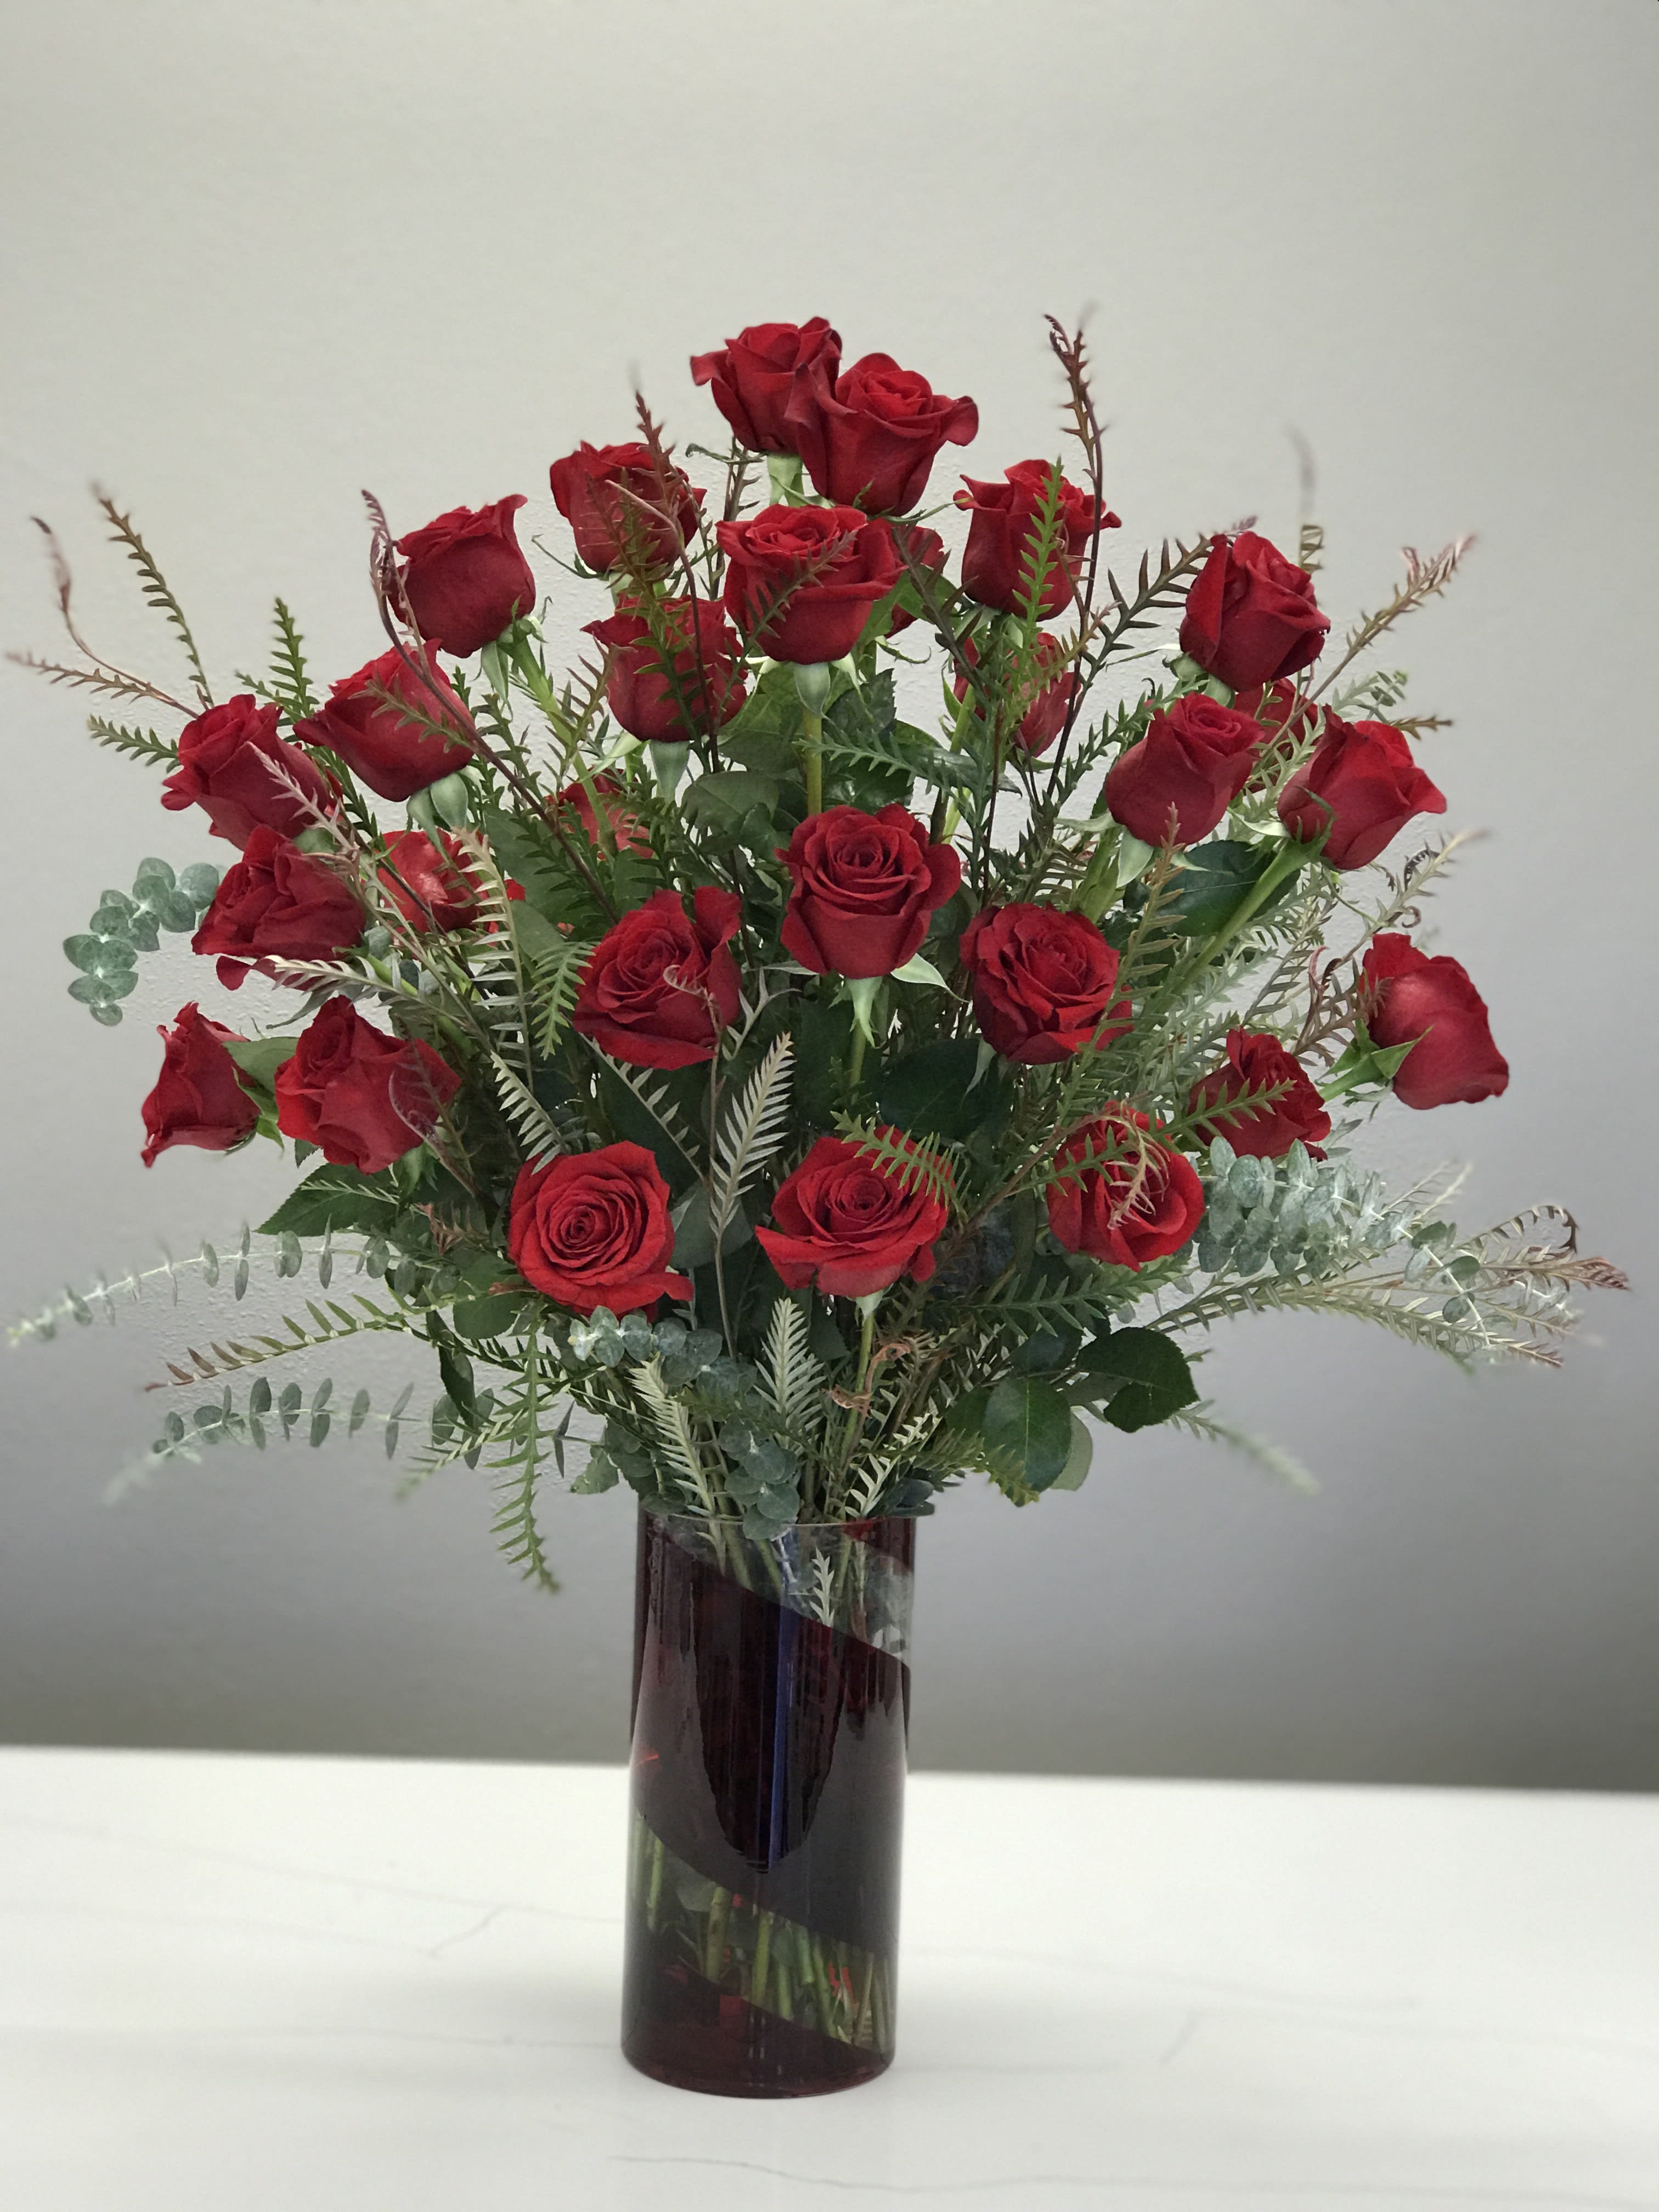 The LUXE - 3 dozen long-stemmed red roses arranged in a tall red and clear cylinder and peppered with elegant greens are here to show the love of your life a tangible representation of the beauty they bring to you. XOXO. Order the Deluxe for a pop of white scabiosa! 